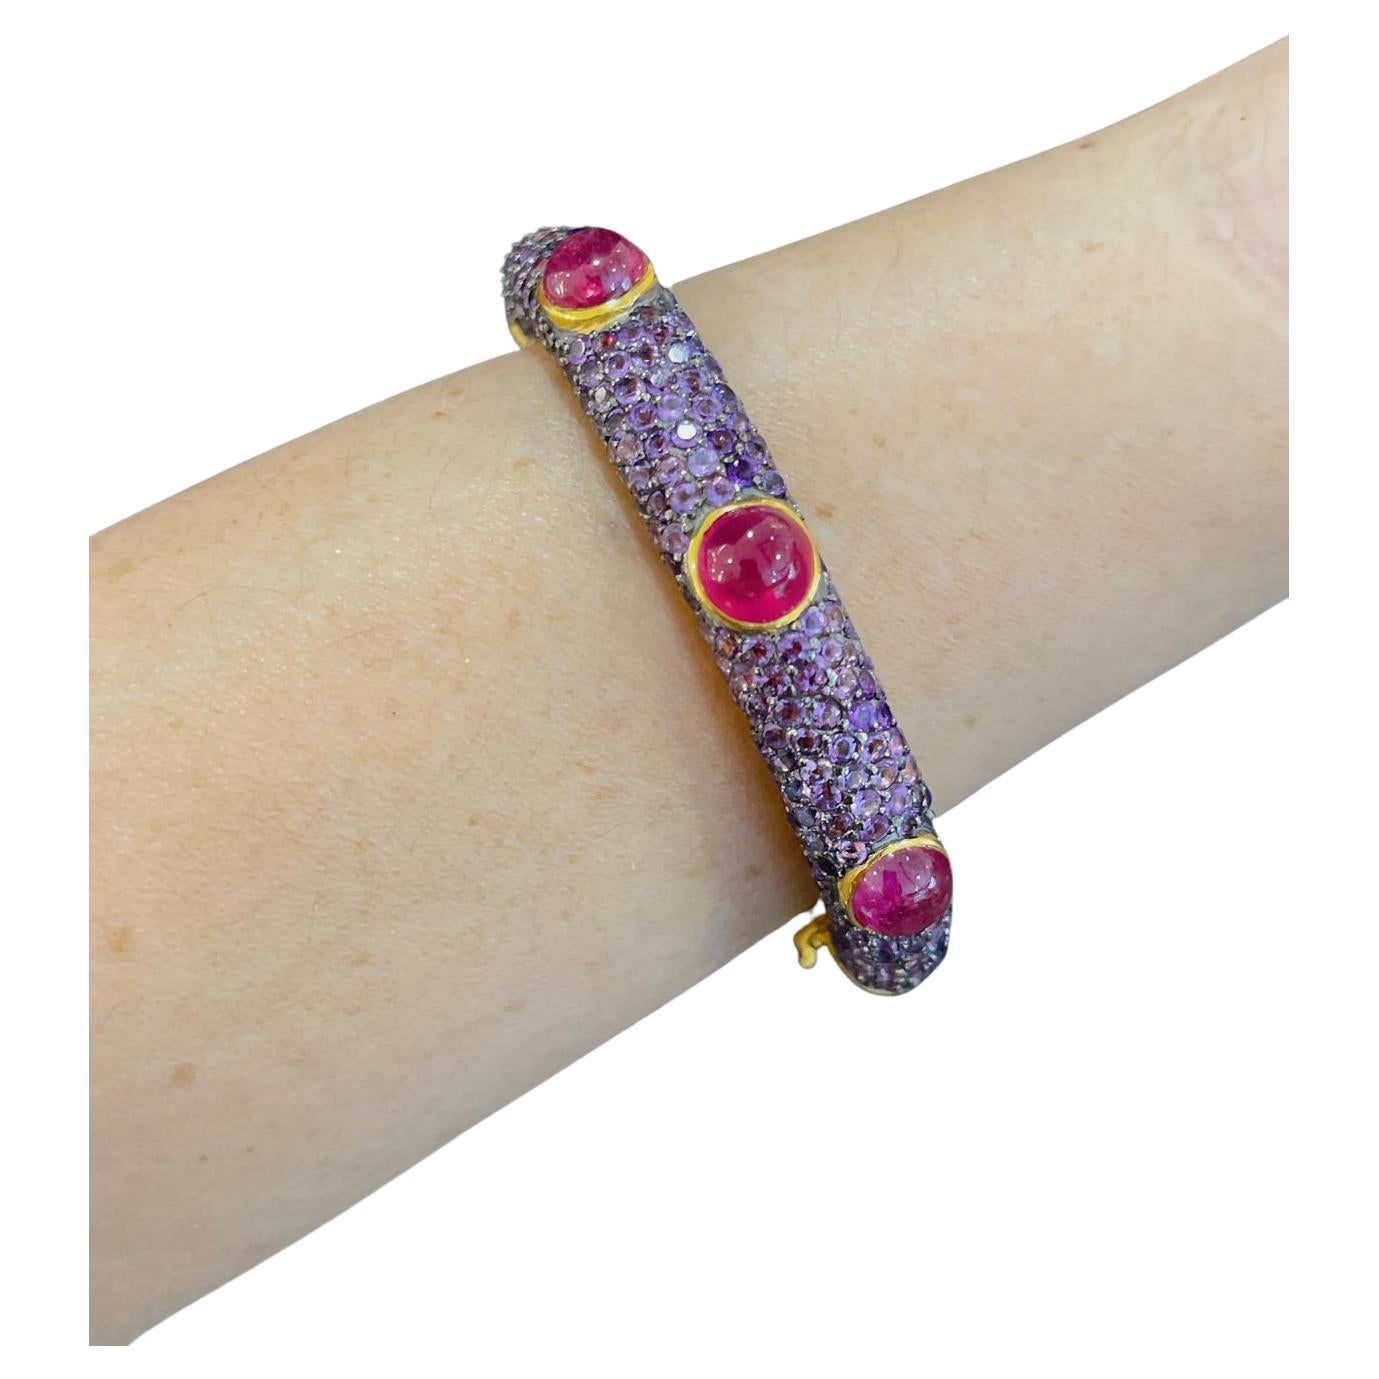 Bochic “Capri” Red Ruby & Purple Amethyst Bangle Set In 22K Gold & Silver 
Bochic Multi Gem “Capri” Bangle
The bangle has 2.2 Inch internal dimension and fits an average 7 inch wrist size
It has an open and close clasp and a safety hook
The inside